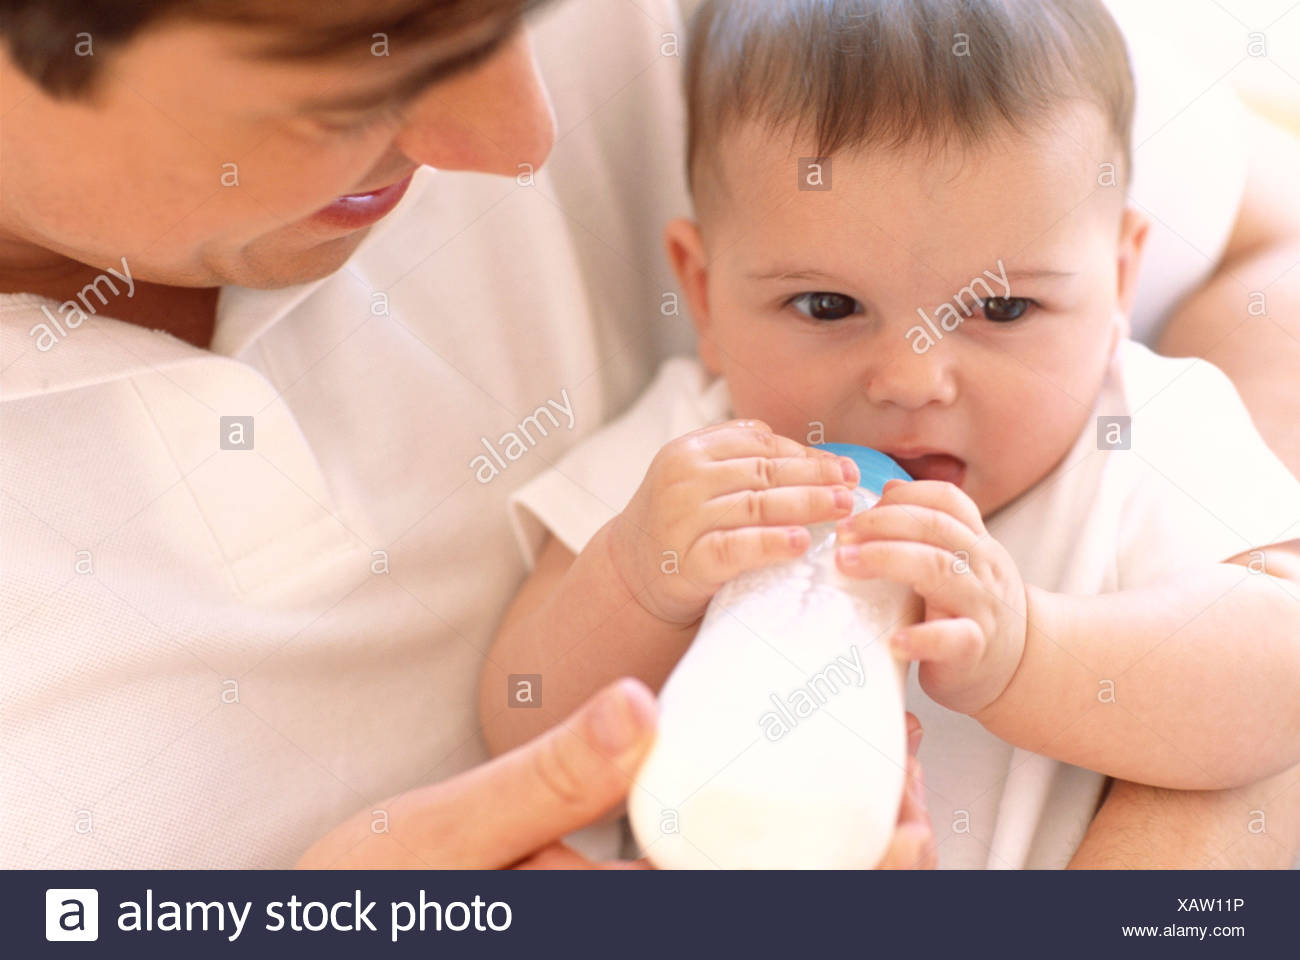 Father Bottle Feeding Baby Father Using A Bottle To Feed Milk To